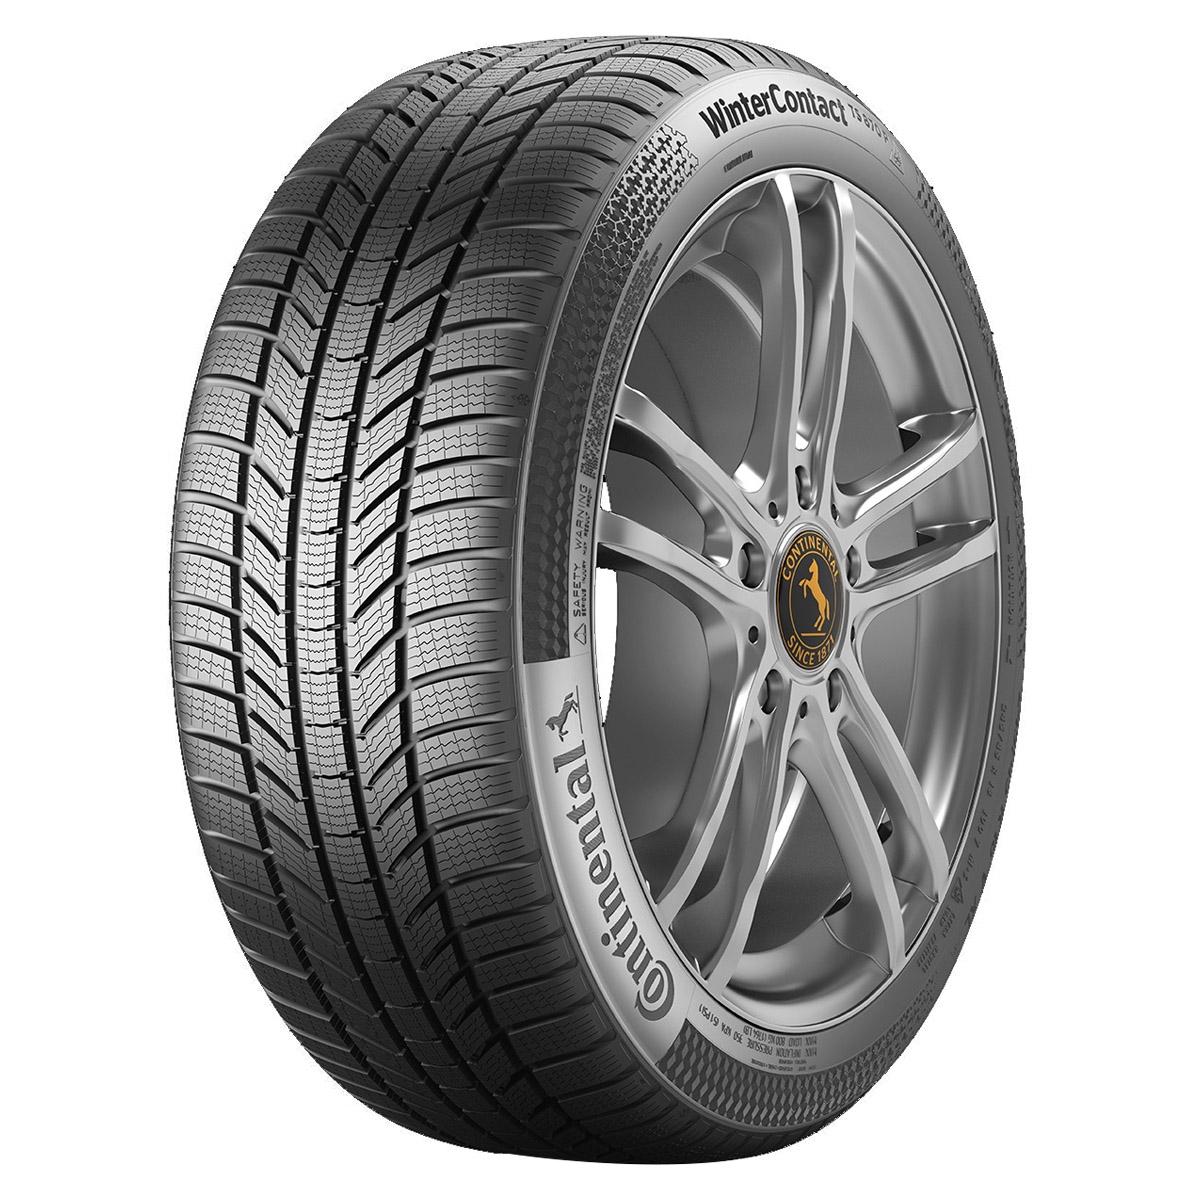 Anvelope iarna CONTINENTAL WINTER CONTACT TS870 P 235/55 R17 99H